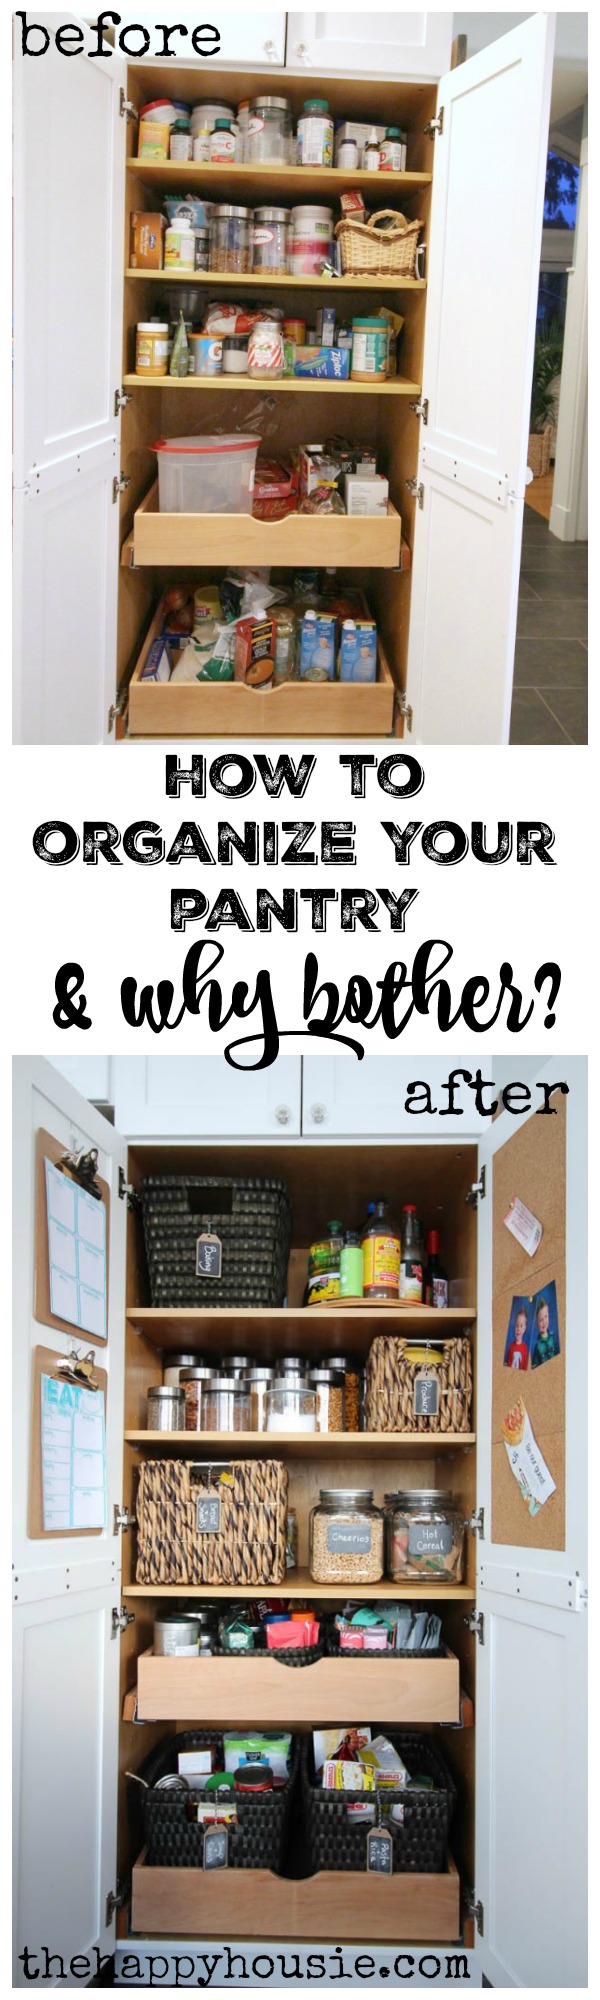 How to Organize Your Pantry and 3 reasons you should even bother with it at thehappyhousie.com